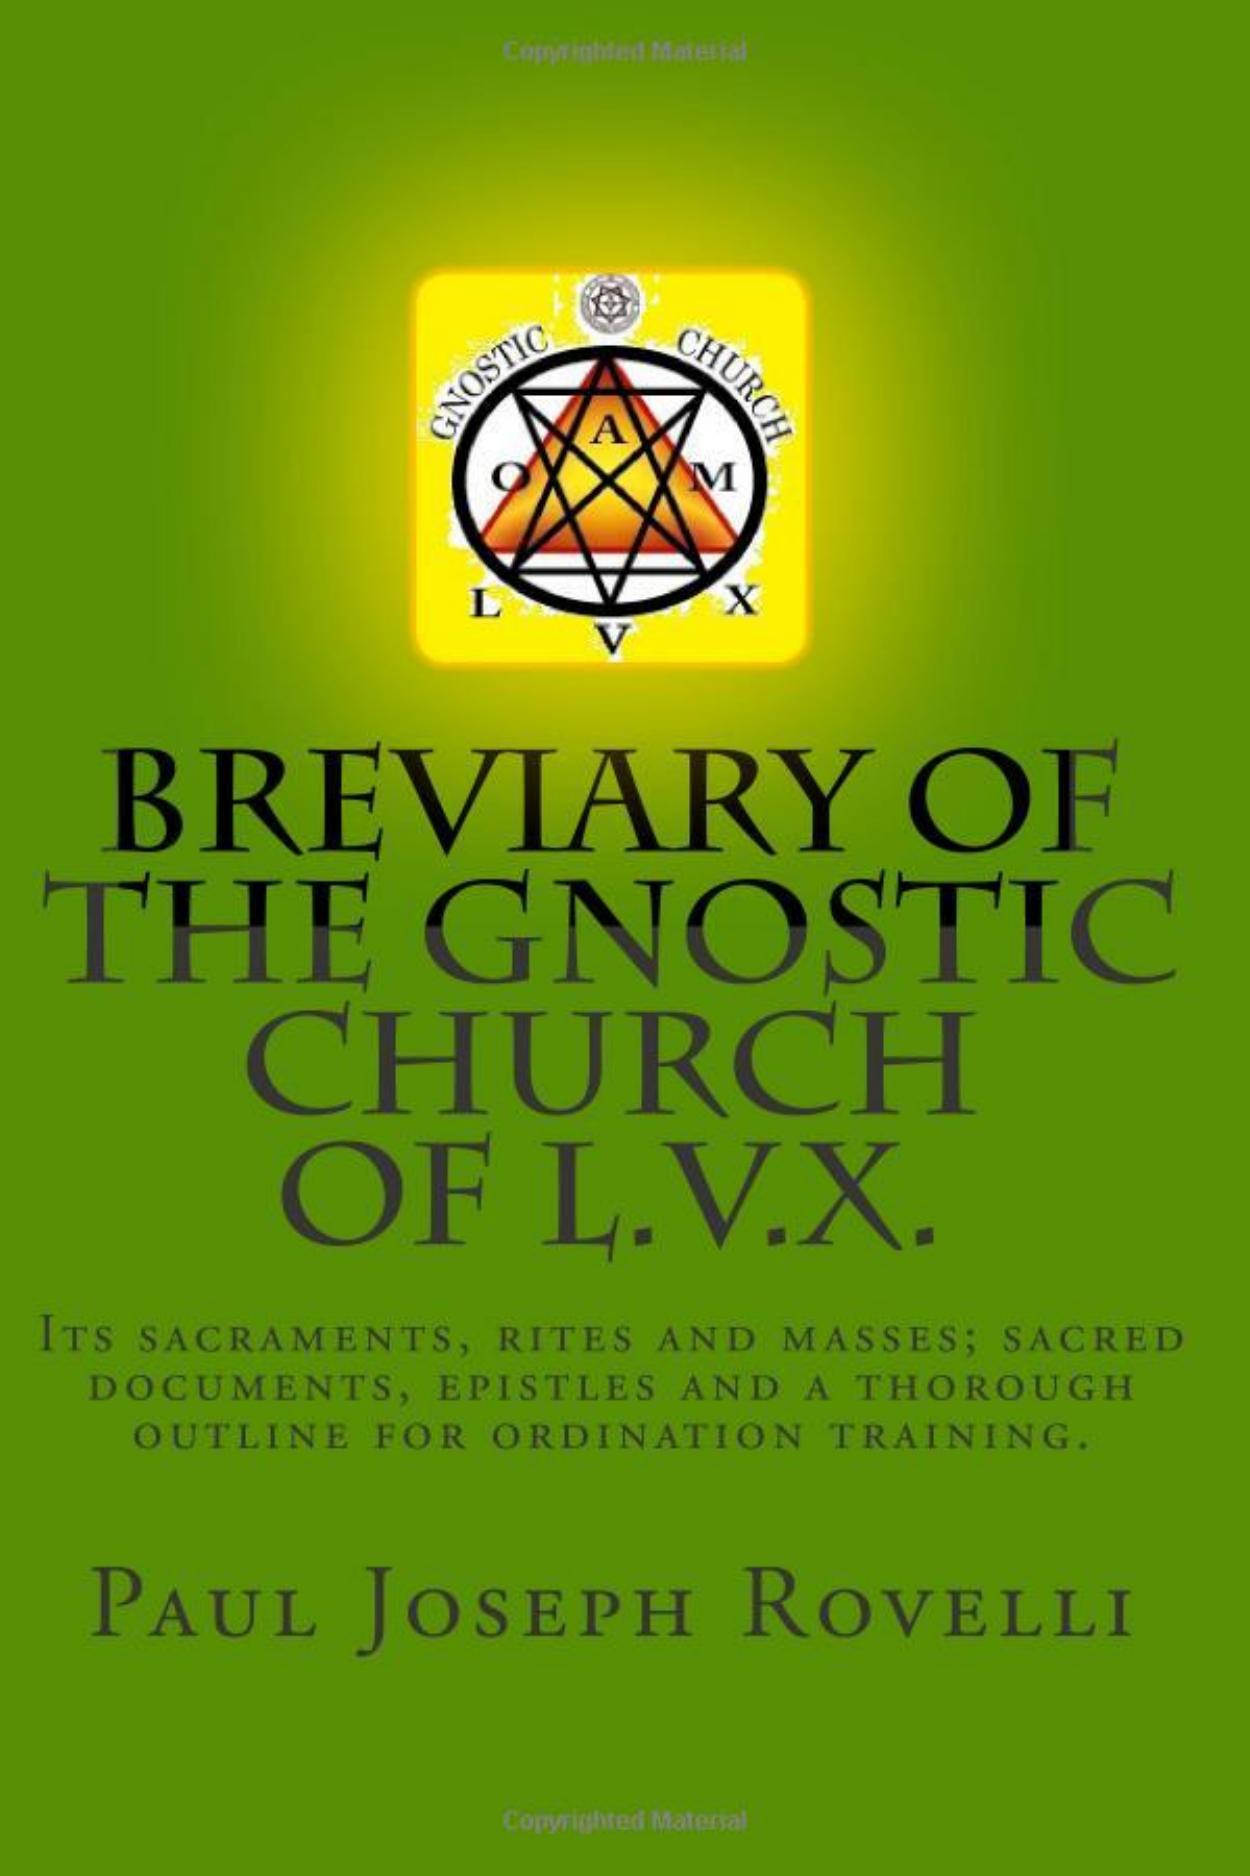 Breviary of the Gnostic Church of L.V.X. by Paul Joseph Rovelli